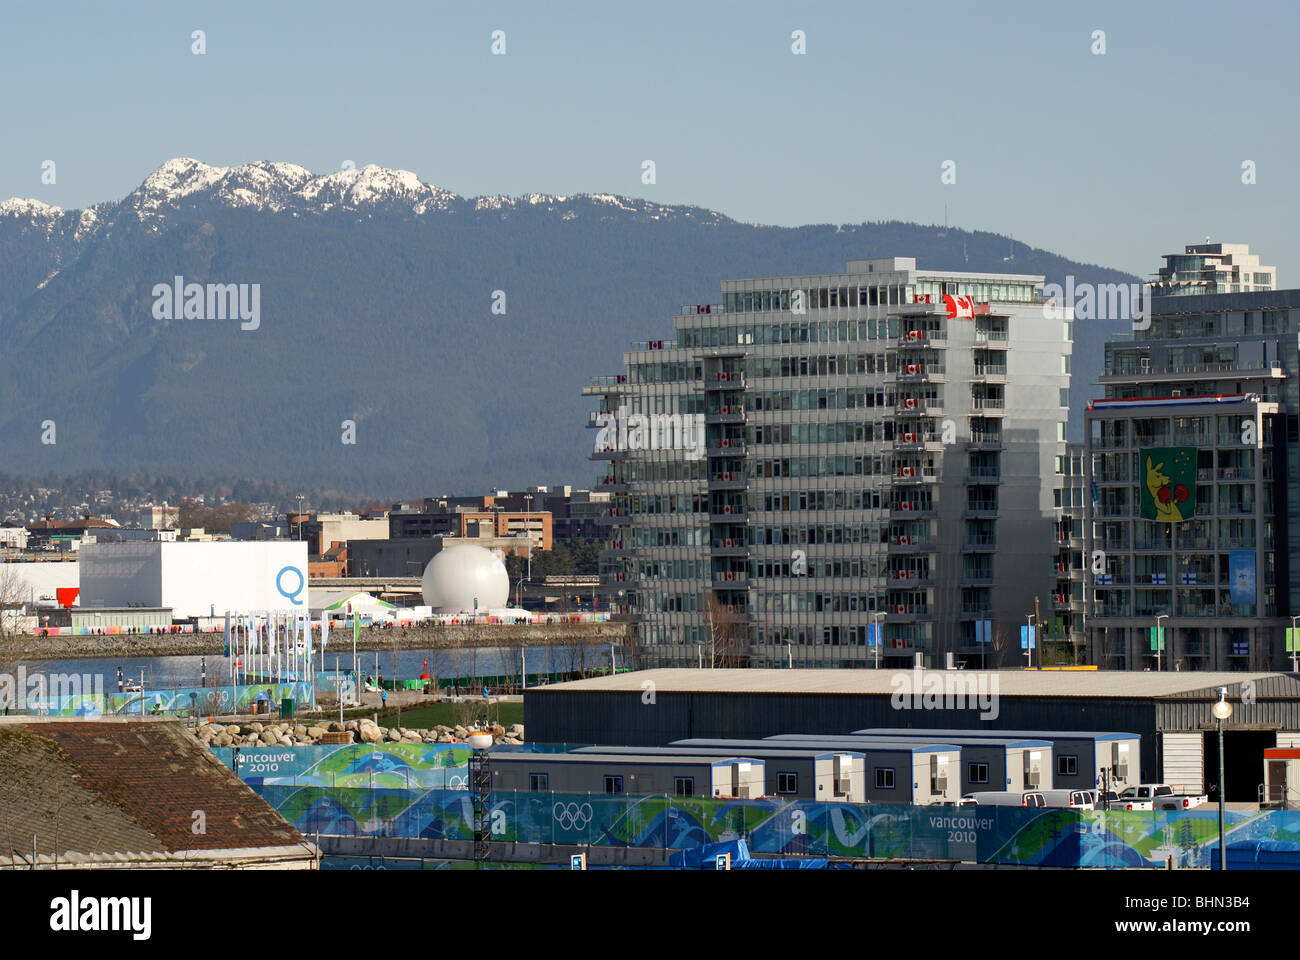 The Olympic and Paralympic Village at the 2010 Winter Games, Vancouver, British Columbia, Canada Stock Photo